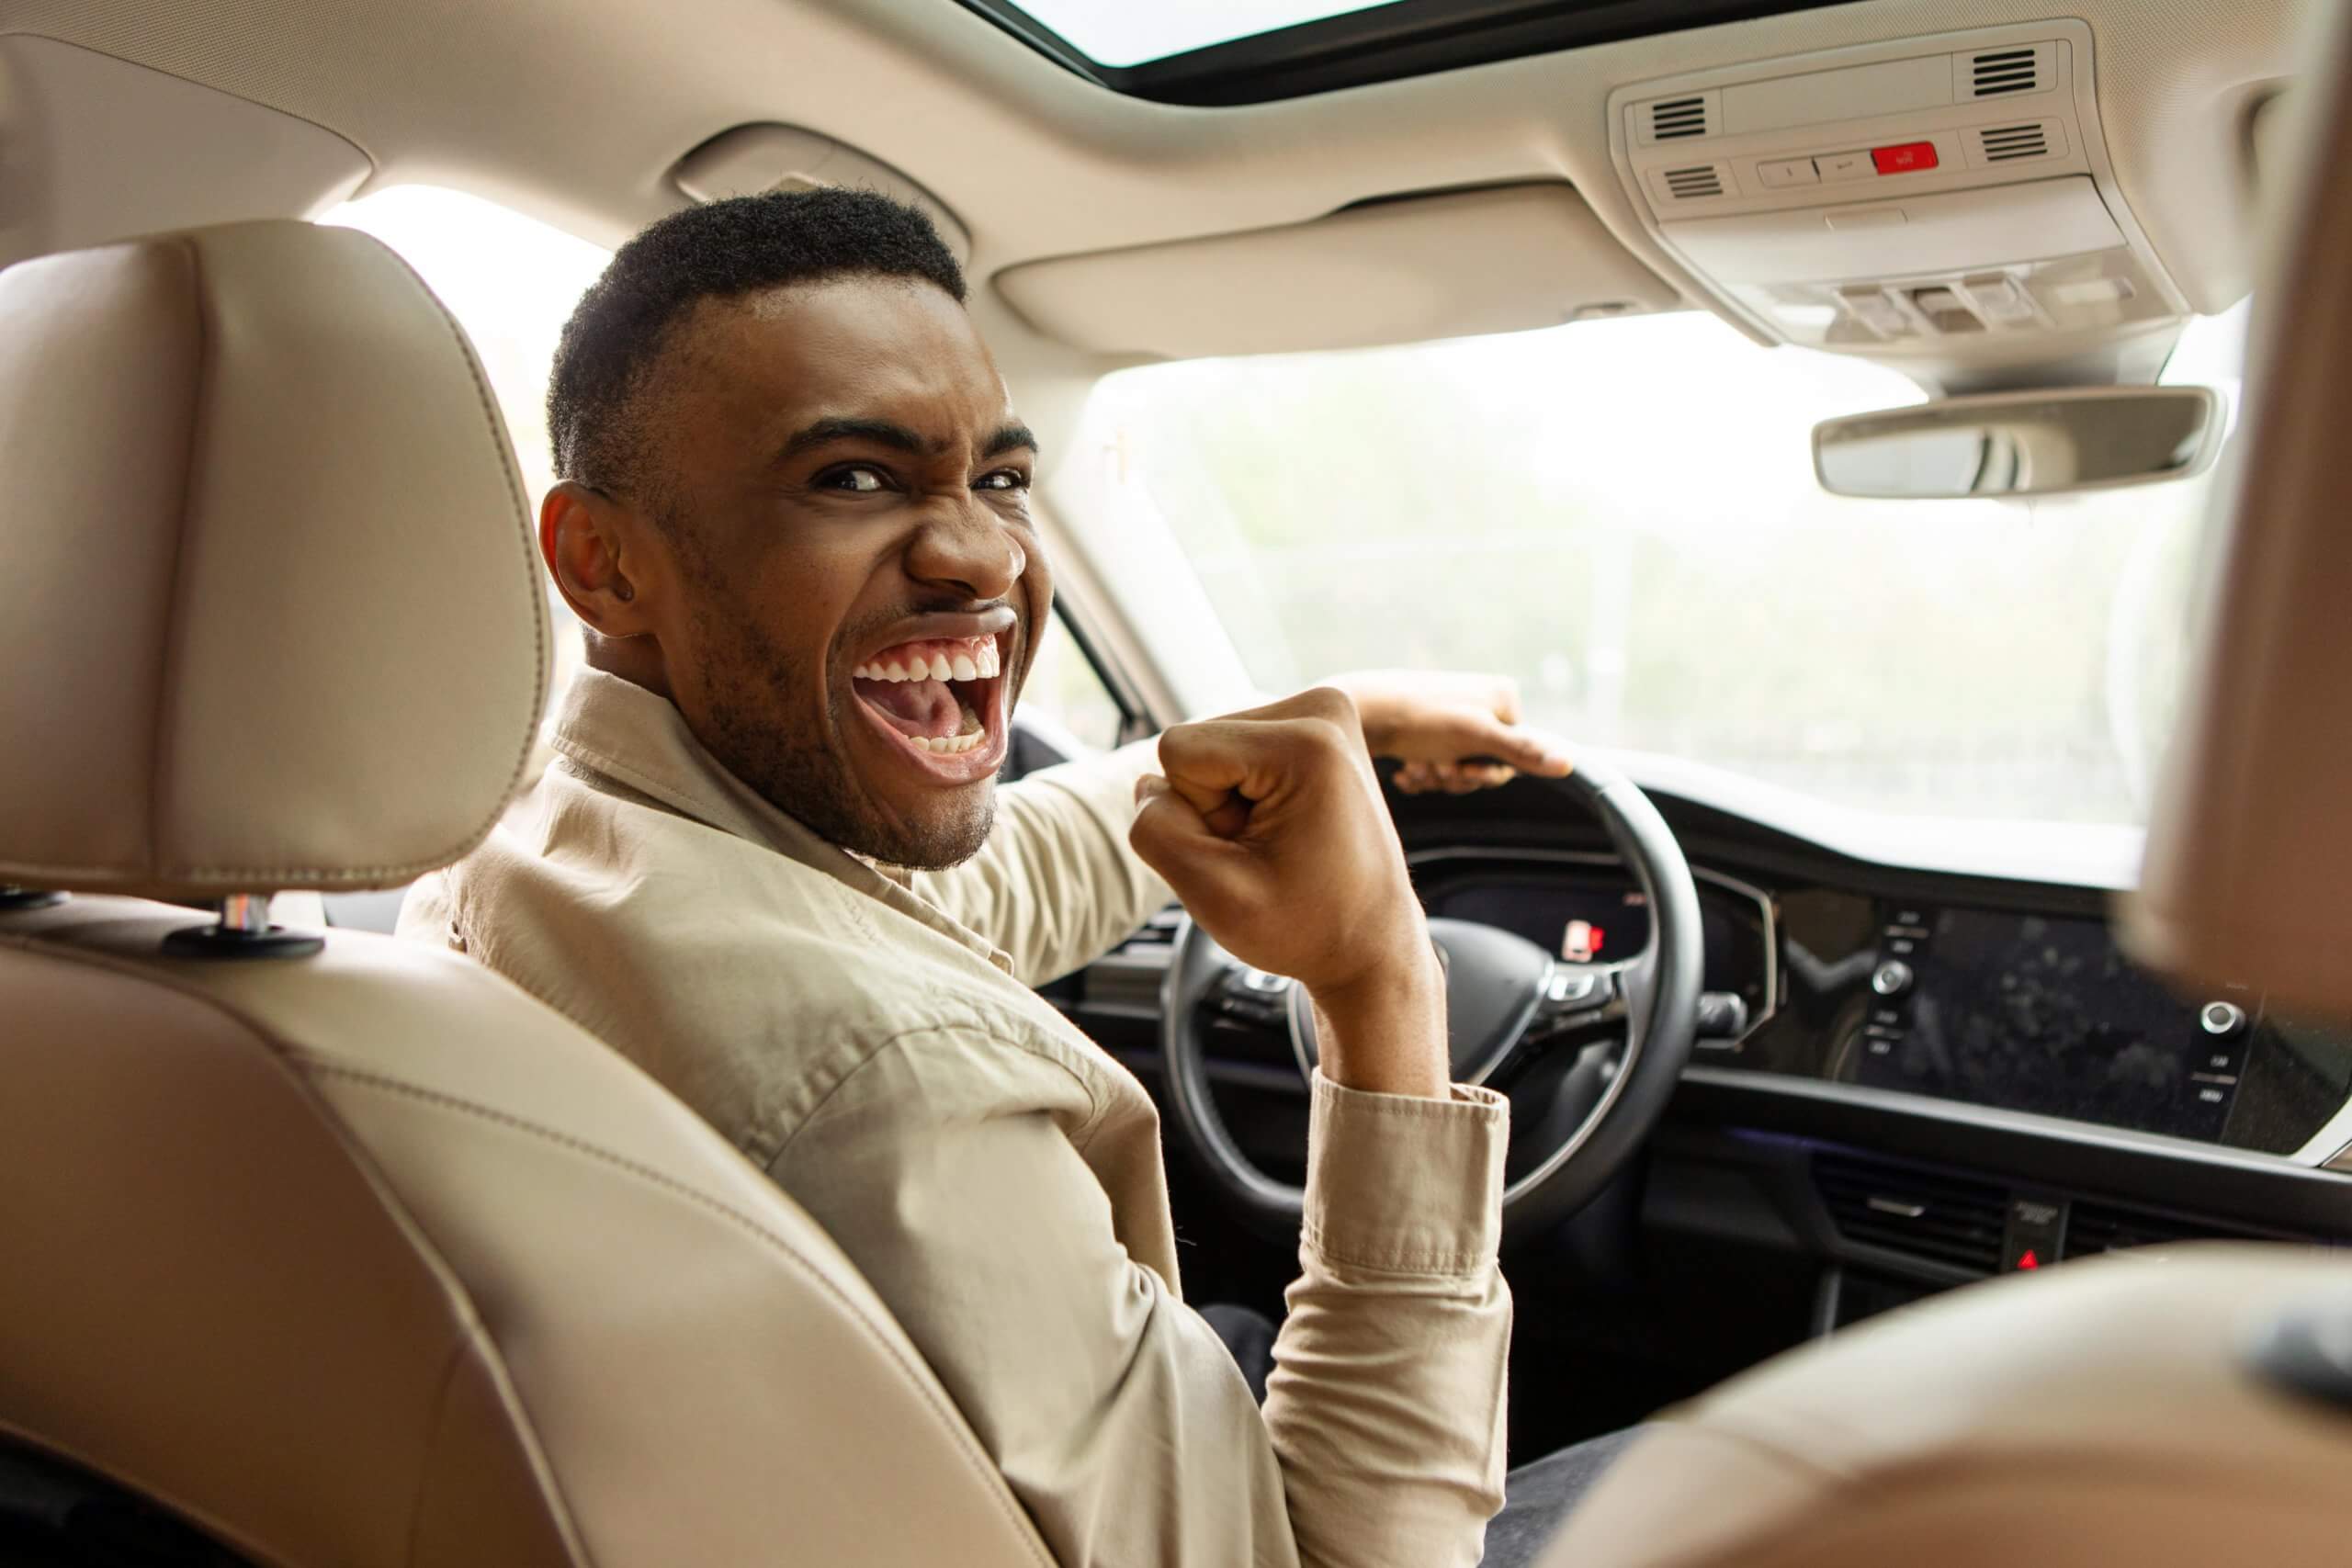 Young man who bought his first car and is smiling enthusiastically in the front seat